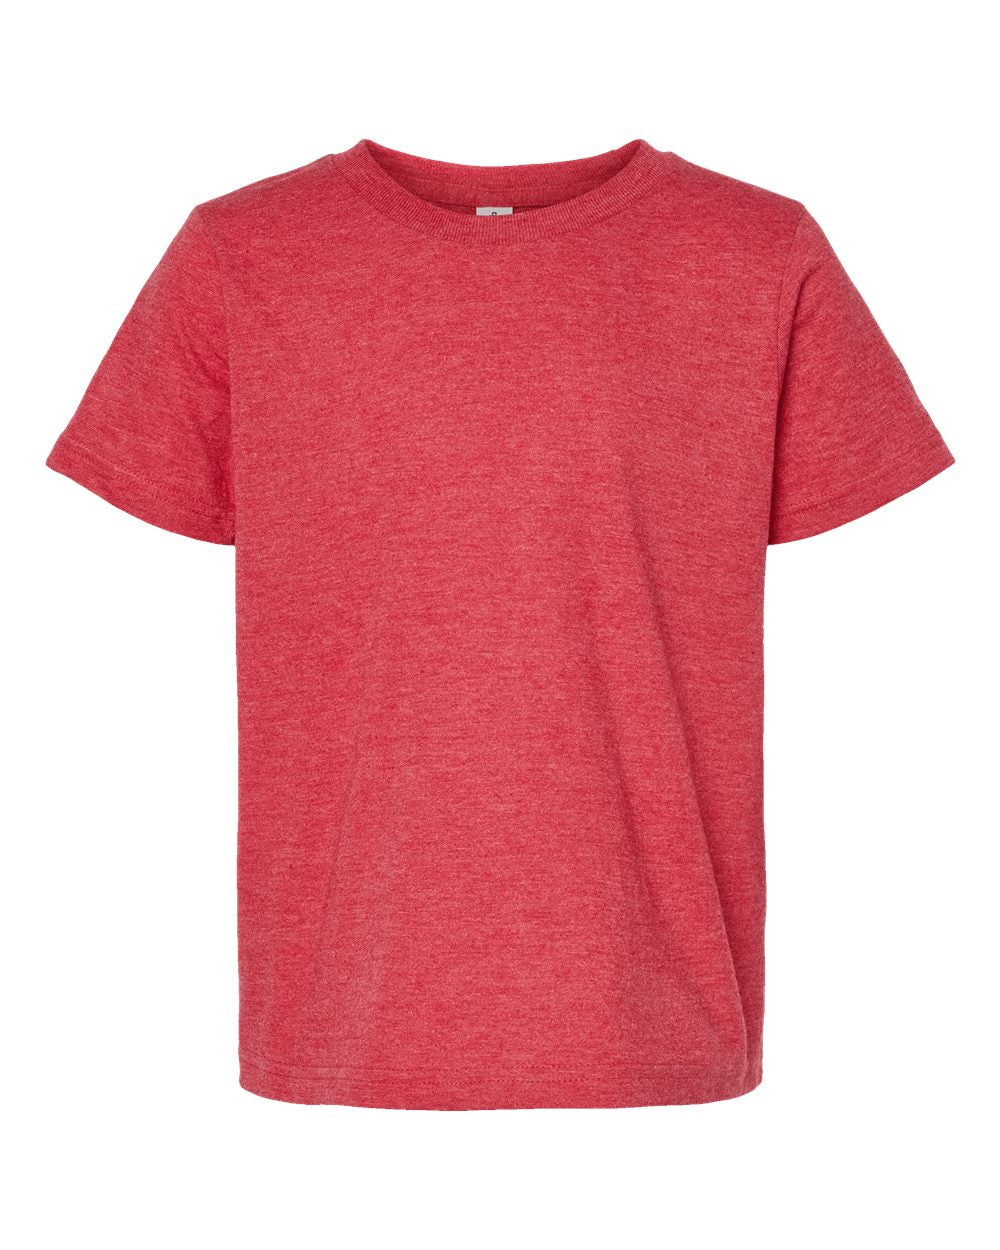 Tultex Youth Tee (235) in Heather Red